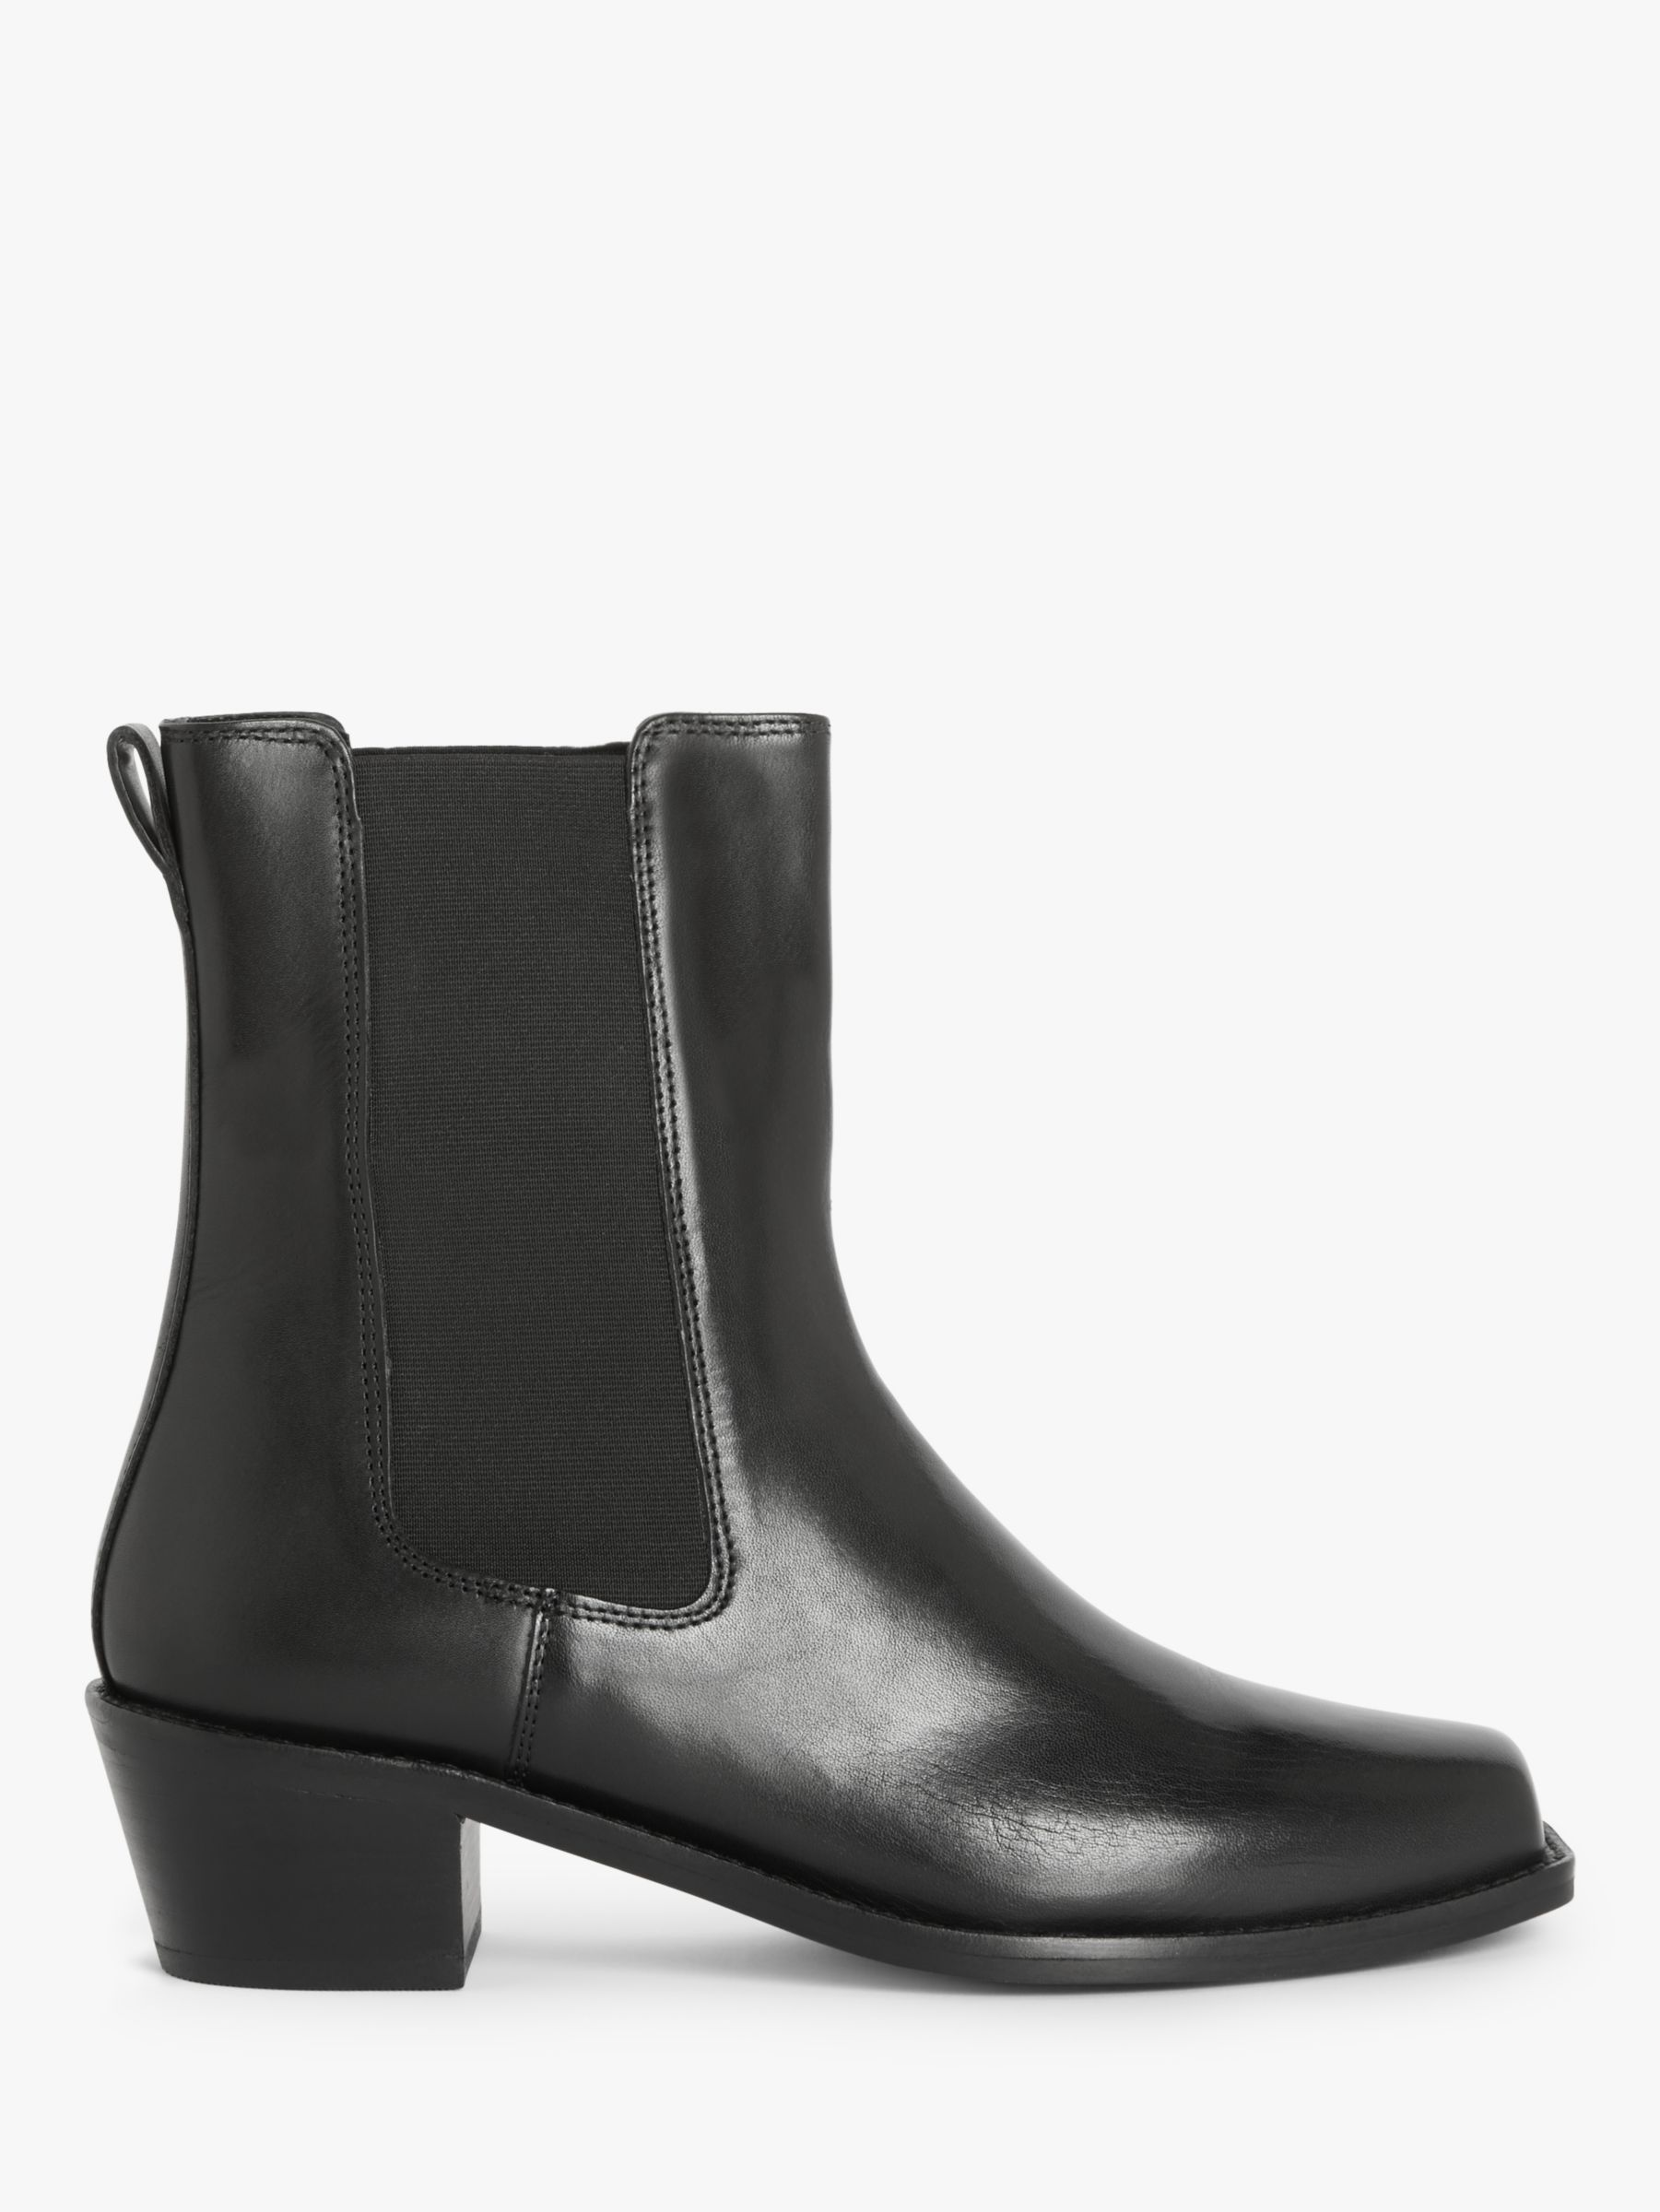 AND/OR Orson Leather Western Ankle Boots, Black, 3